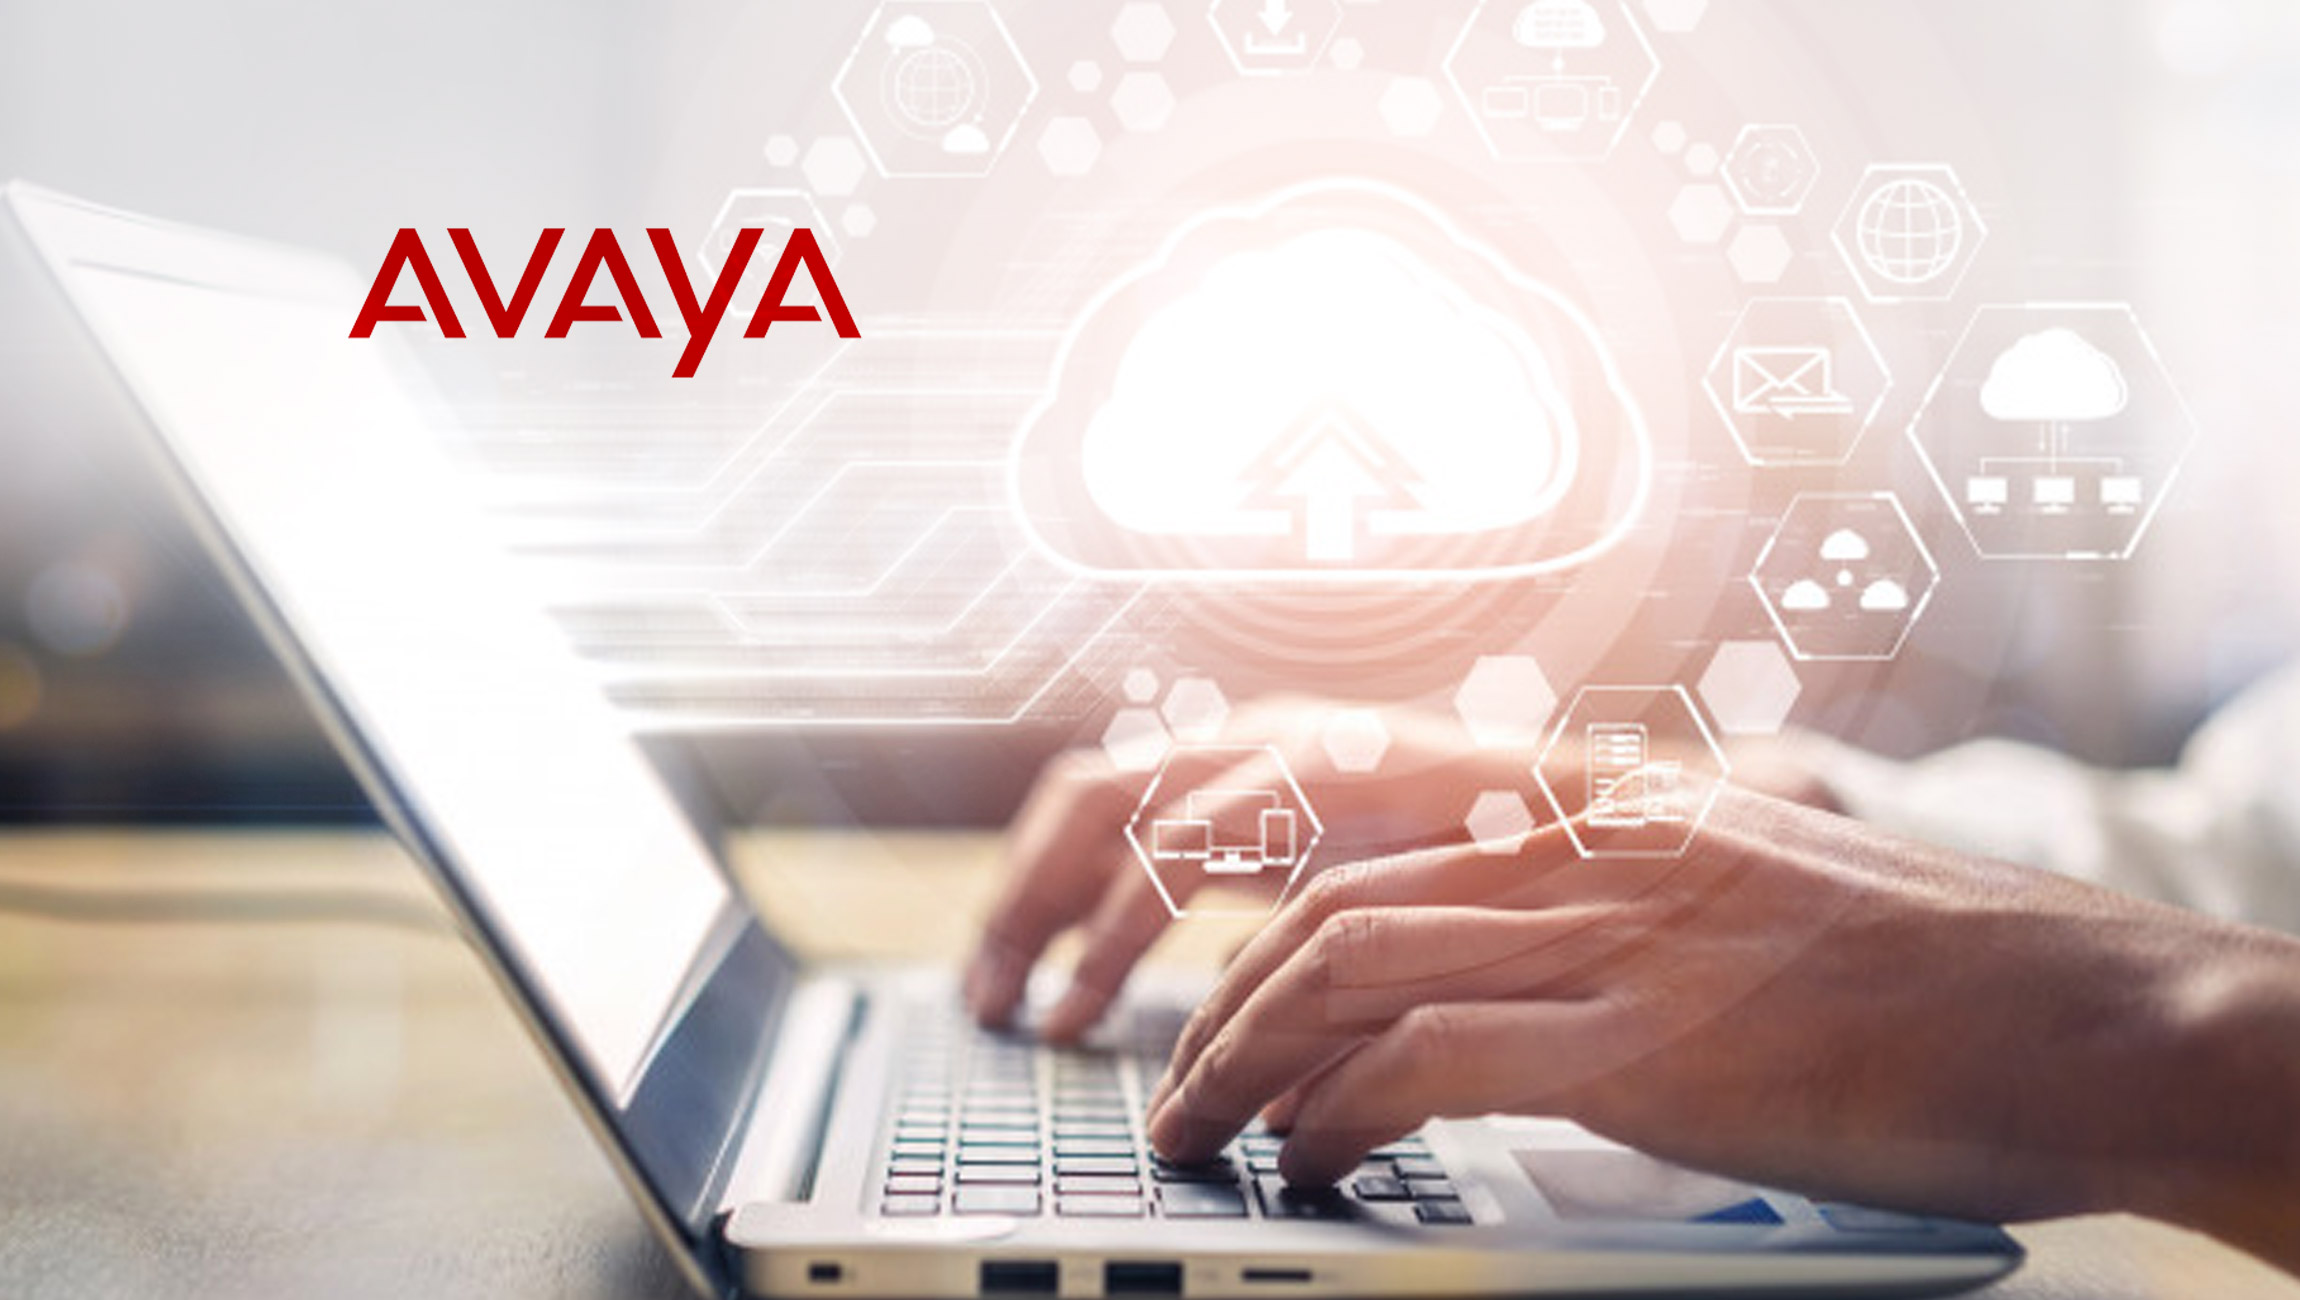 Avaya Named a Top 5 CCaaS Provider By Ventana Research in 2021 Contact Center in the Cloud Value Index, Citing Strength in Delivering Exceptional Customer Experiences